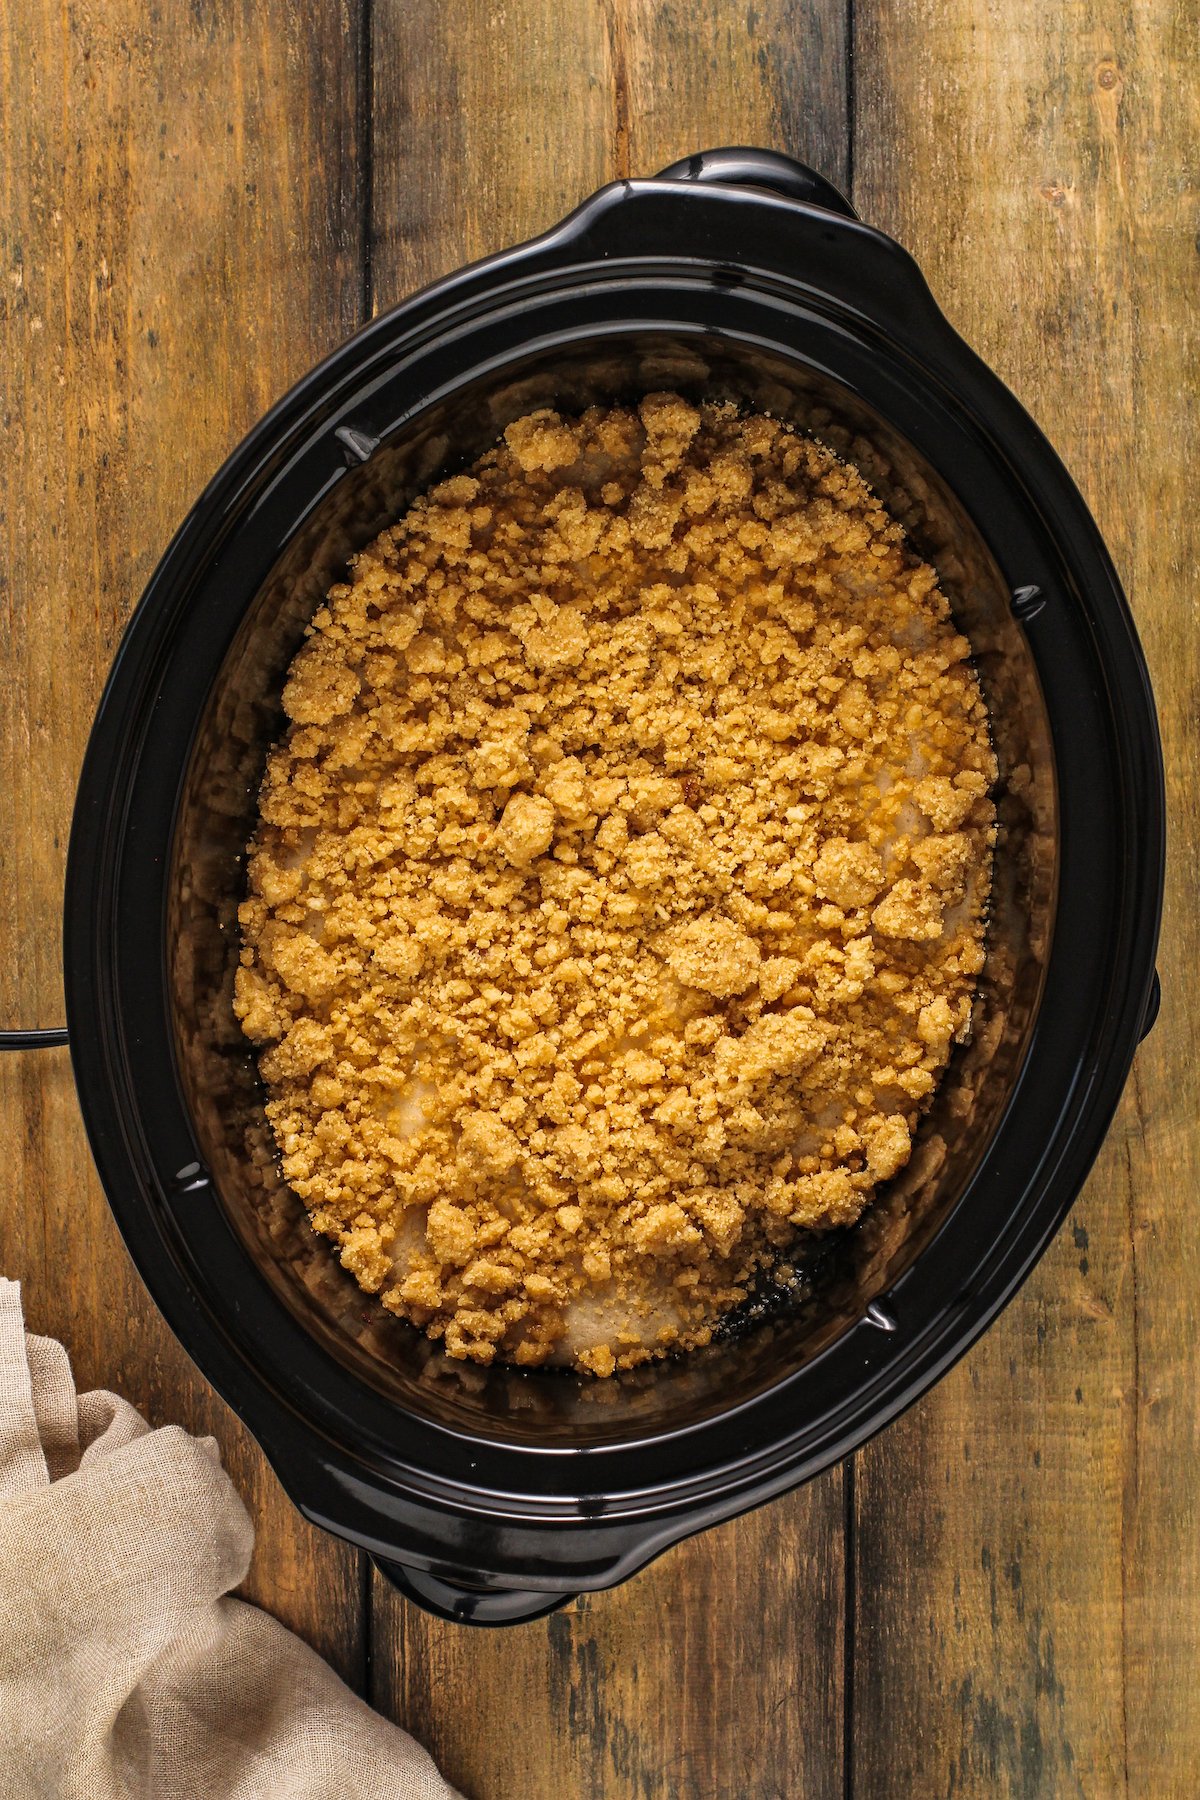 Brown sugar crumble is added overtop the partially cooked peach cobbler inside a crock pot.